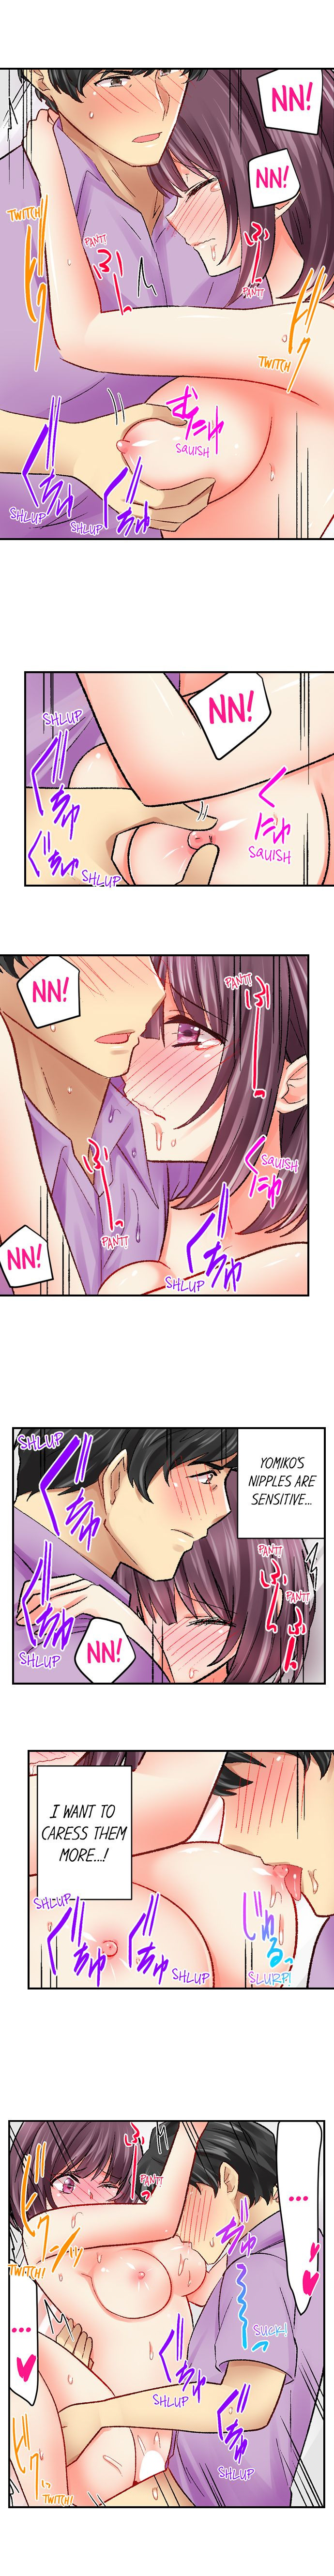 Our Kinky Newlywed Life - Chapter 51 Page 3